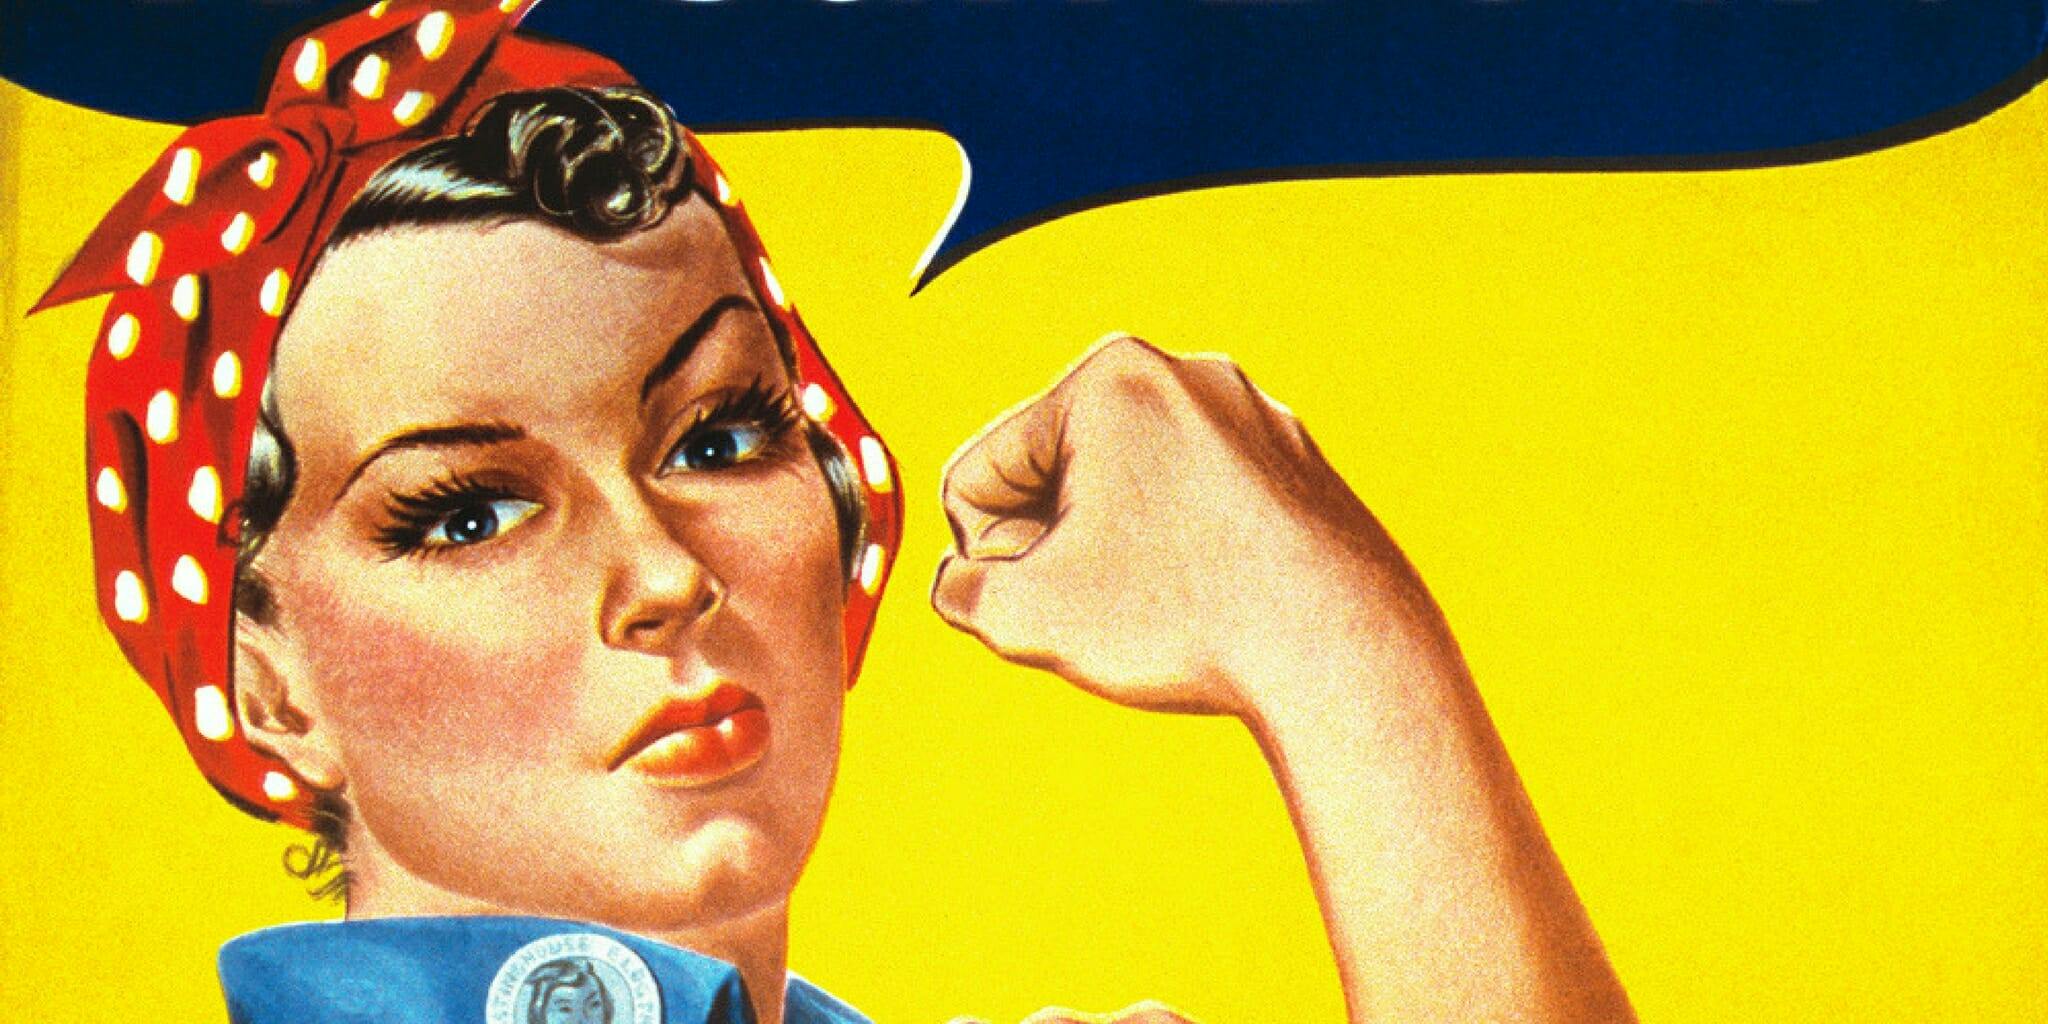 The Rosie the Riveter poster. Naomi Parker Fraley, the Real Rosie the Riveter, has died at 96.